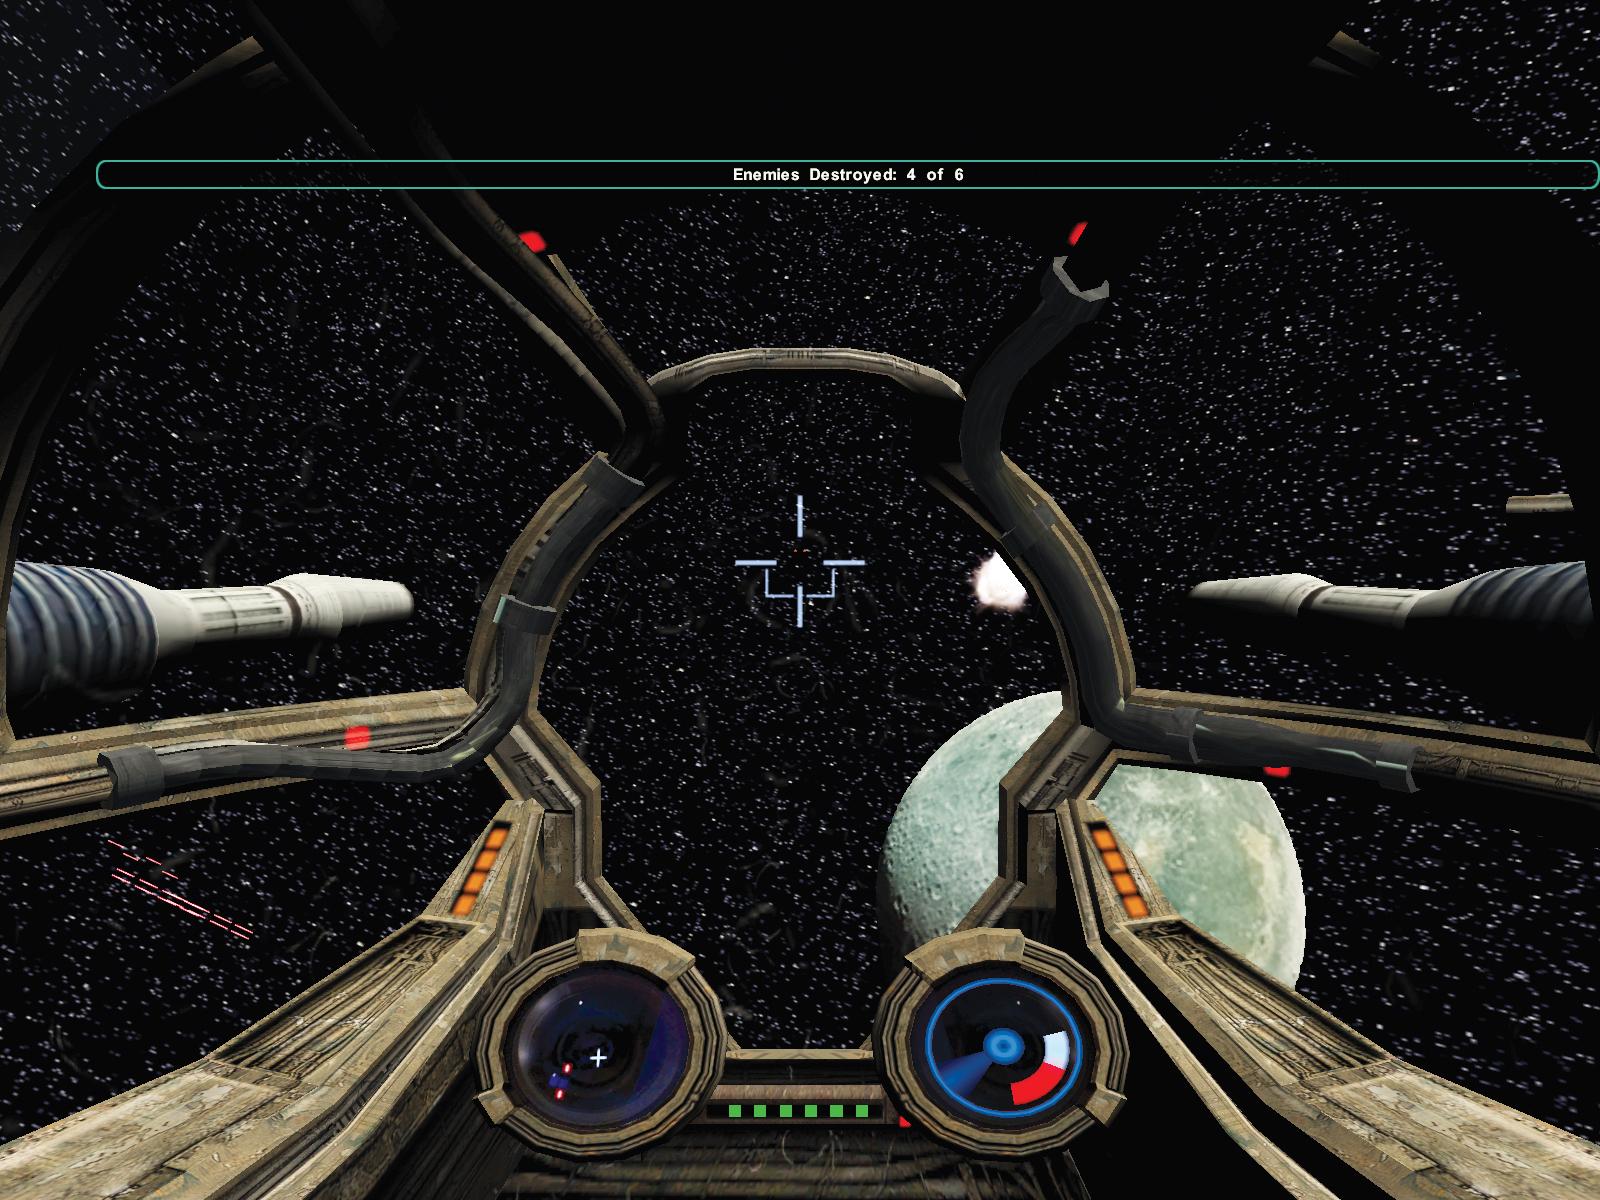 star wars: knights of the old republic ii how to unlock the navi